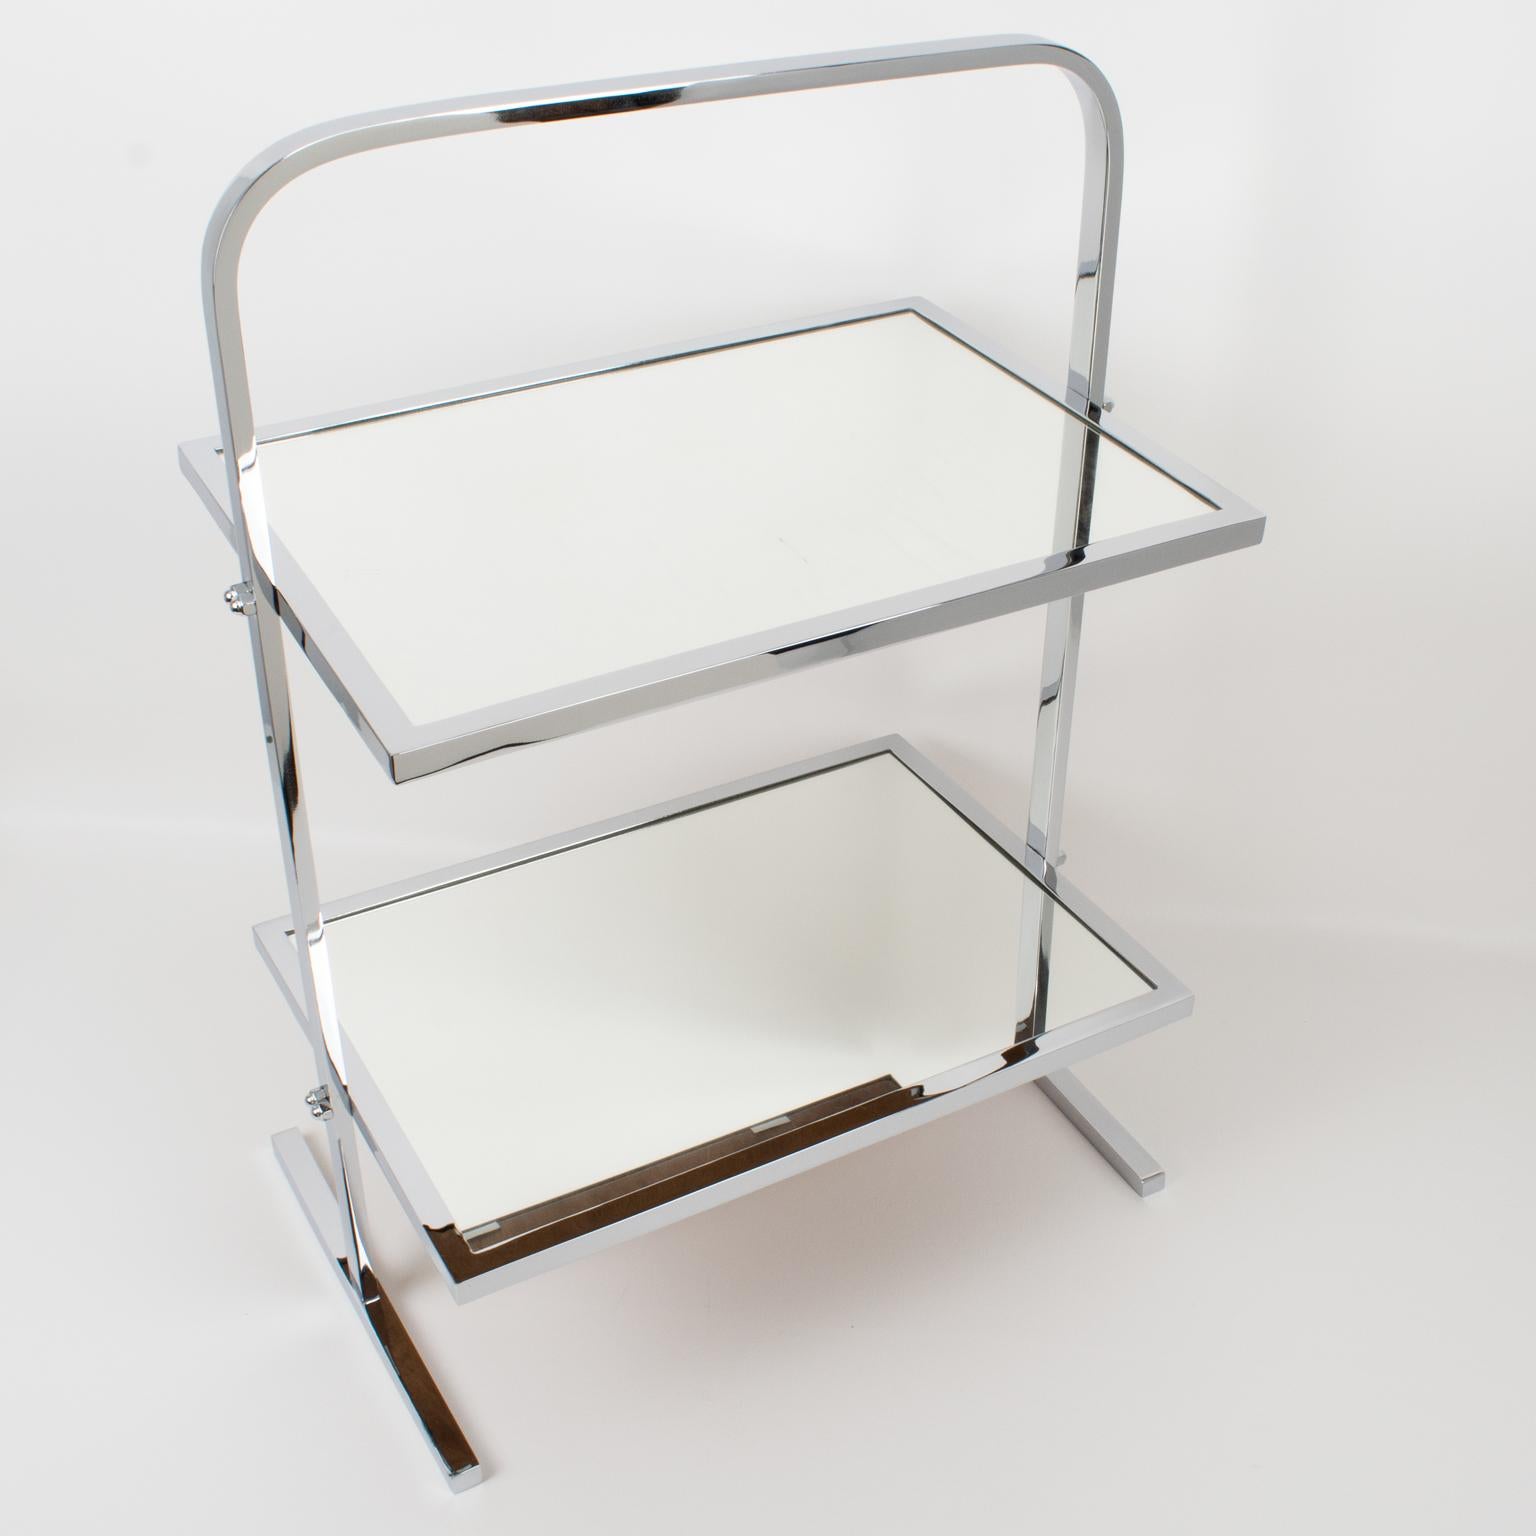 Jacques Adnet (1901 - 1984) designed this rare Art Deco occasional coffee or side table in the 1930s. The chic minimalist design boasts a rectangular two-tray shape with a tall geometric handle. The table is made of chromed metal, and each tray